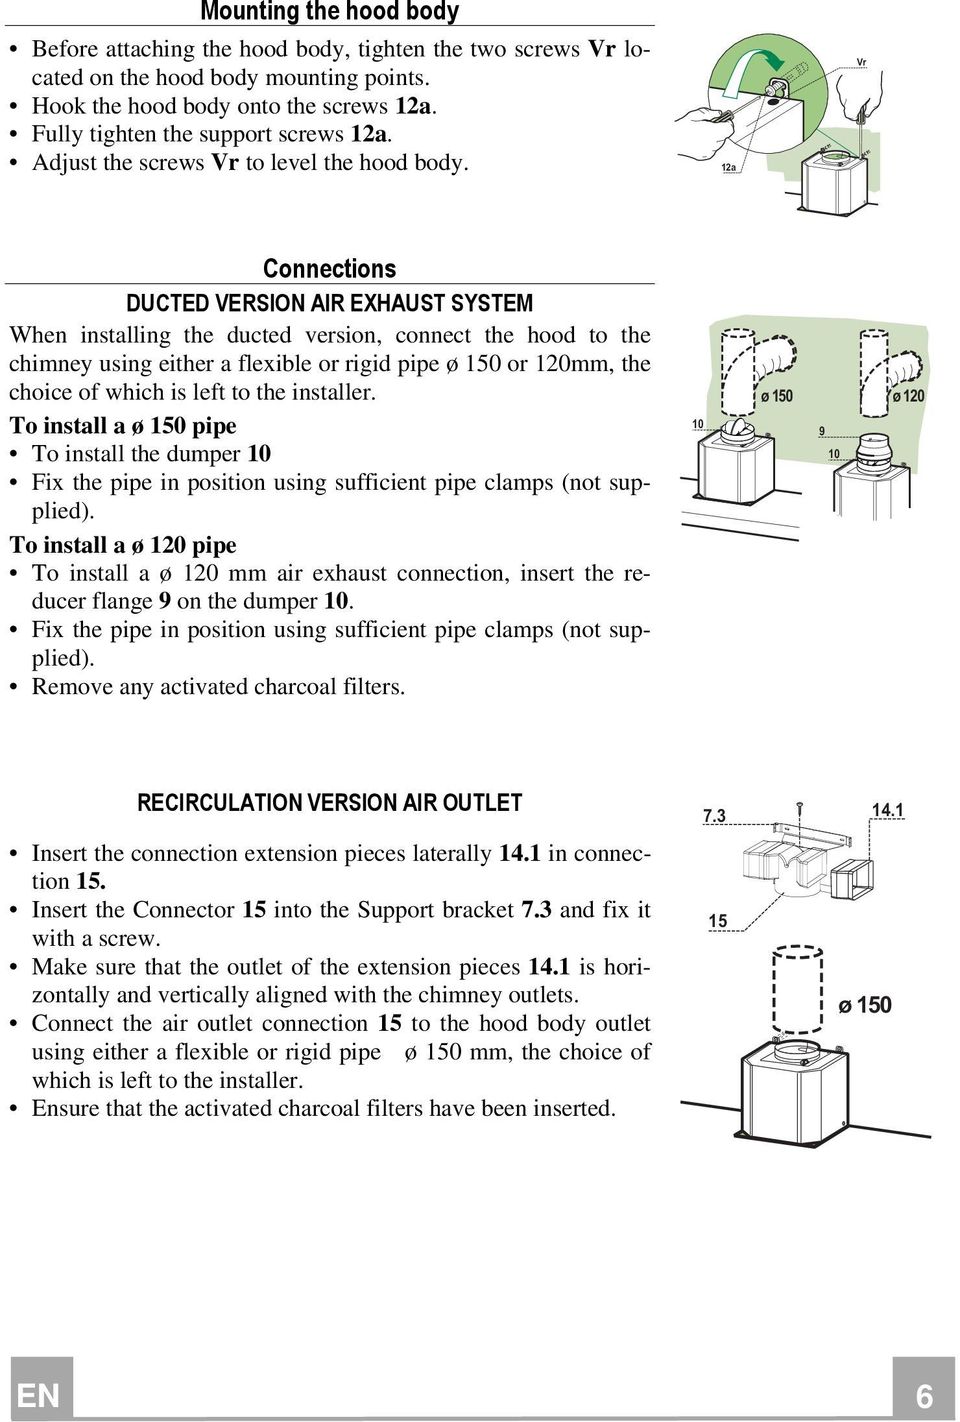 12a Vr Connections DUCTED VERSION AIR EXHAUST SYSTEM When installing the ducted version, connect the hood to the chimney using either a flexible or rigid pipe ø 150 or 120mm, the choice of which is